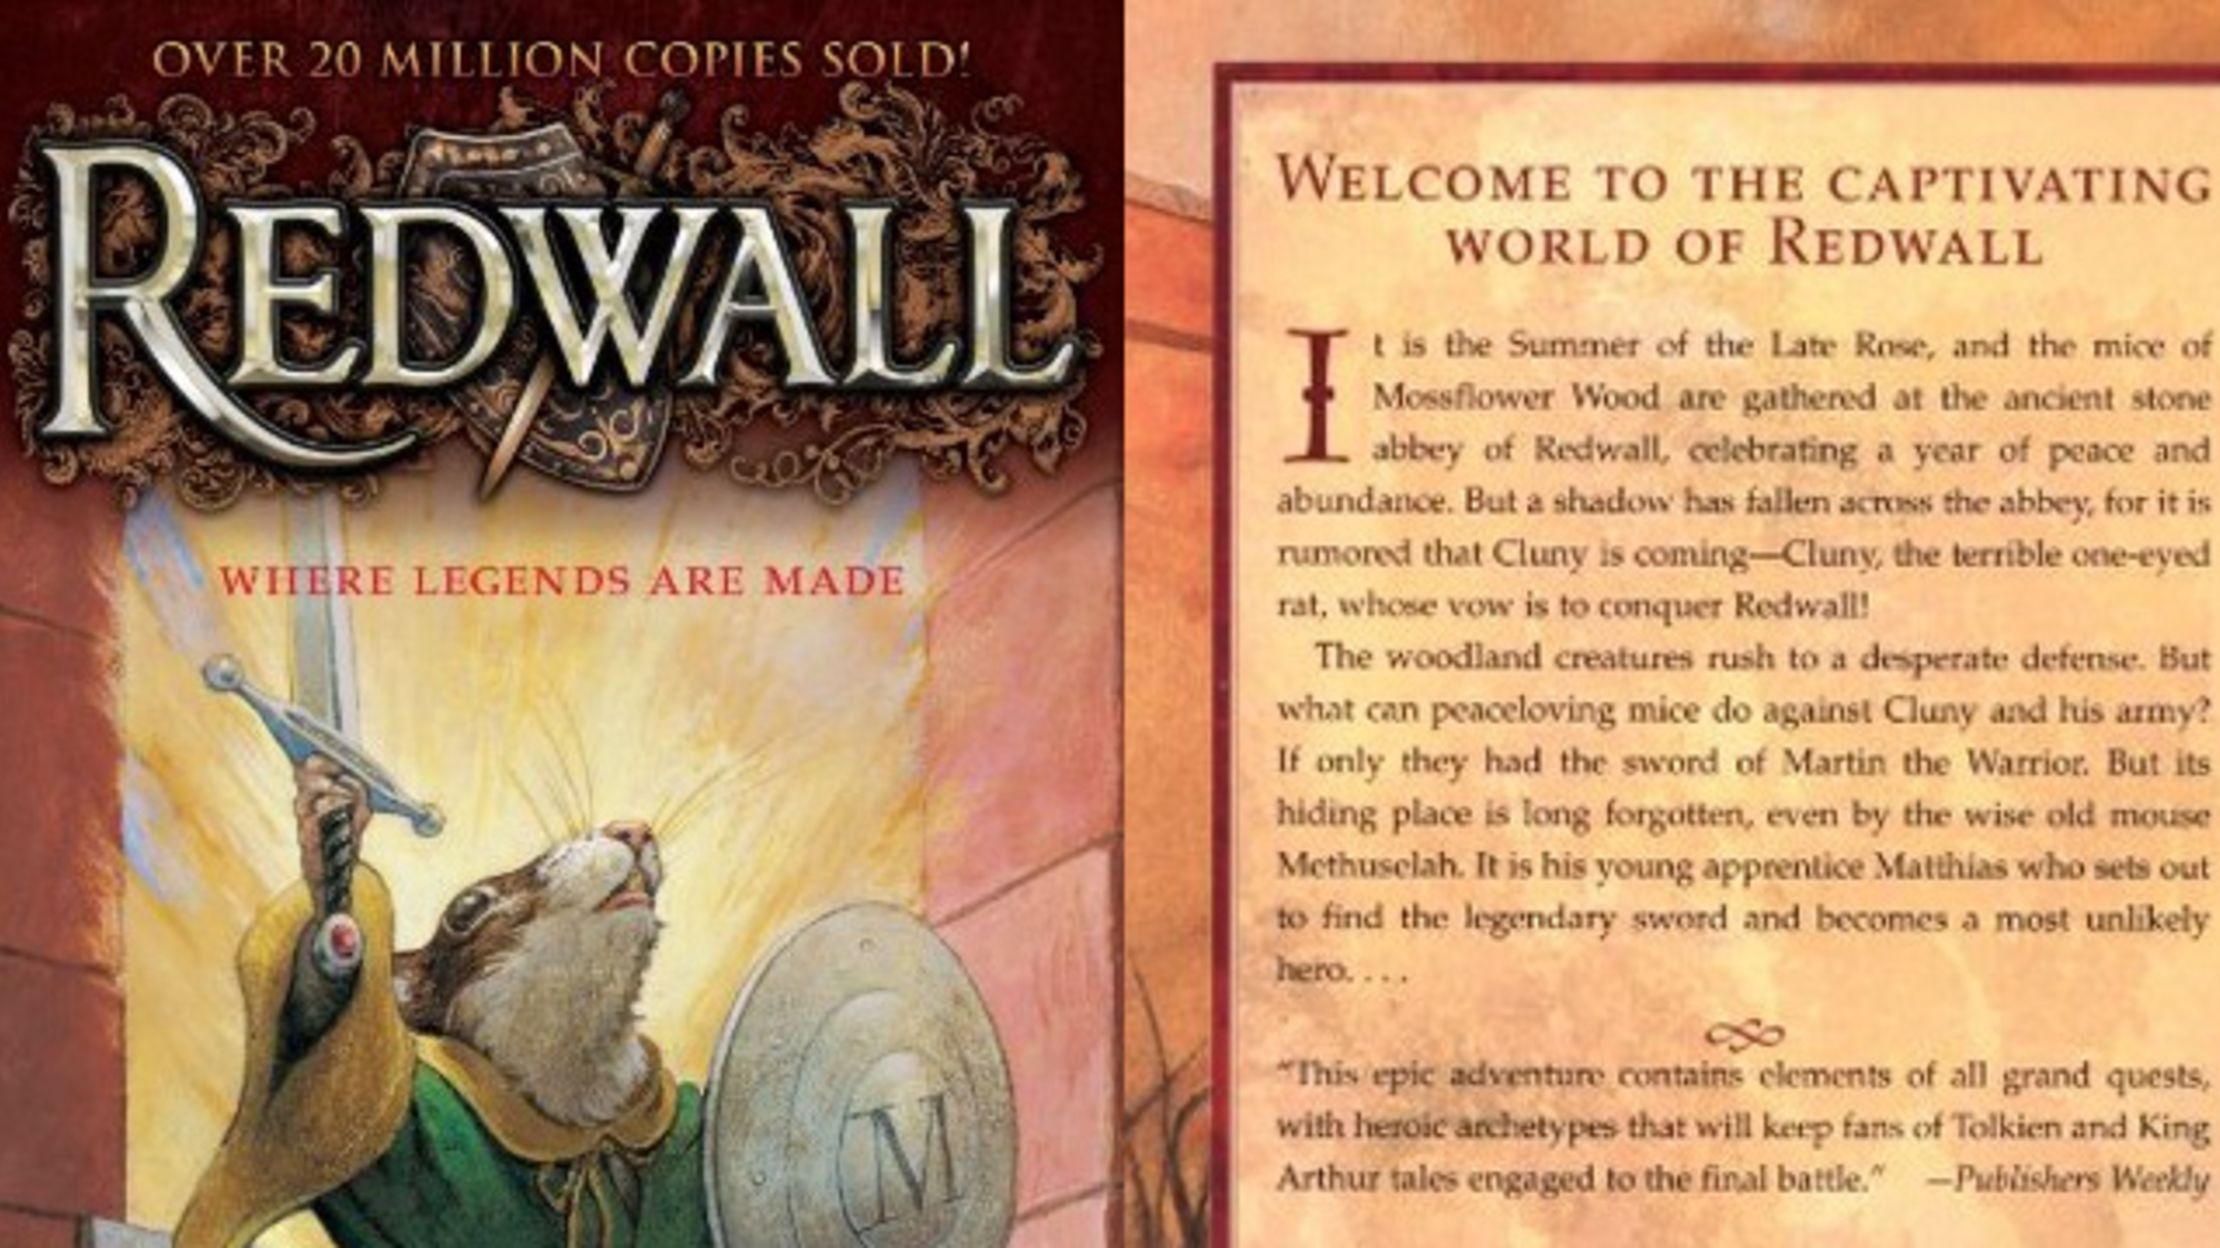 redwall by brian jacques